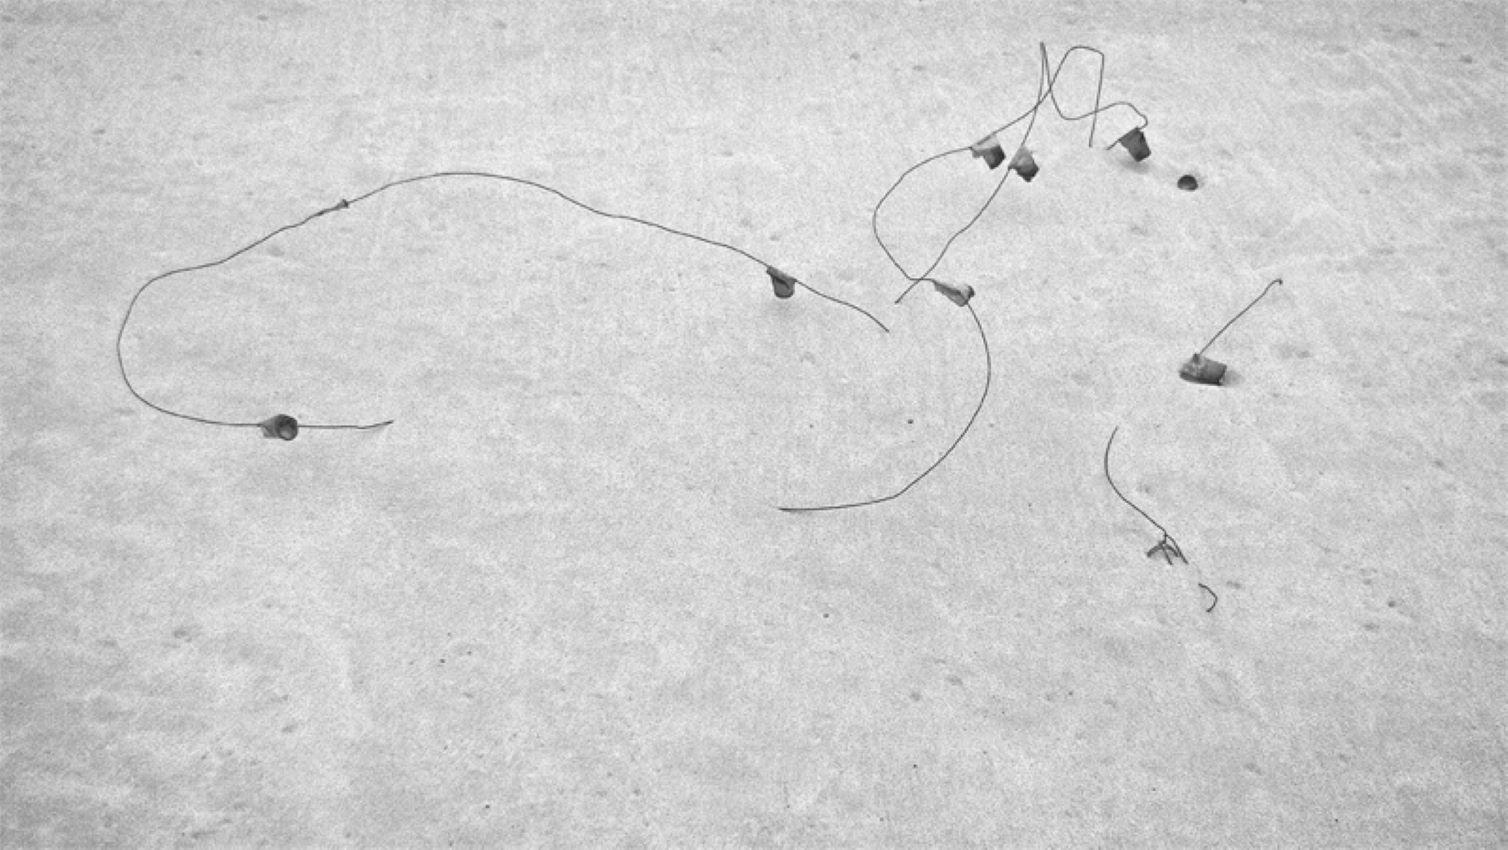 Incidental Sculpture

Wire nd tags are bent and shaped by the sea and embedded in the sand on a beach. 

by Stuart Möller

Born in Kabul, part German and Anglo-Indian and having grown up all over the world,
Stuart Möller is a fine art photographer